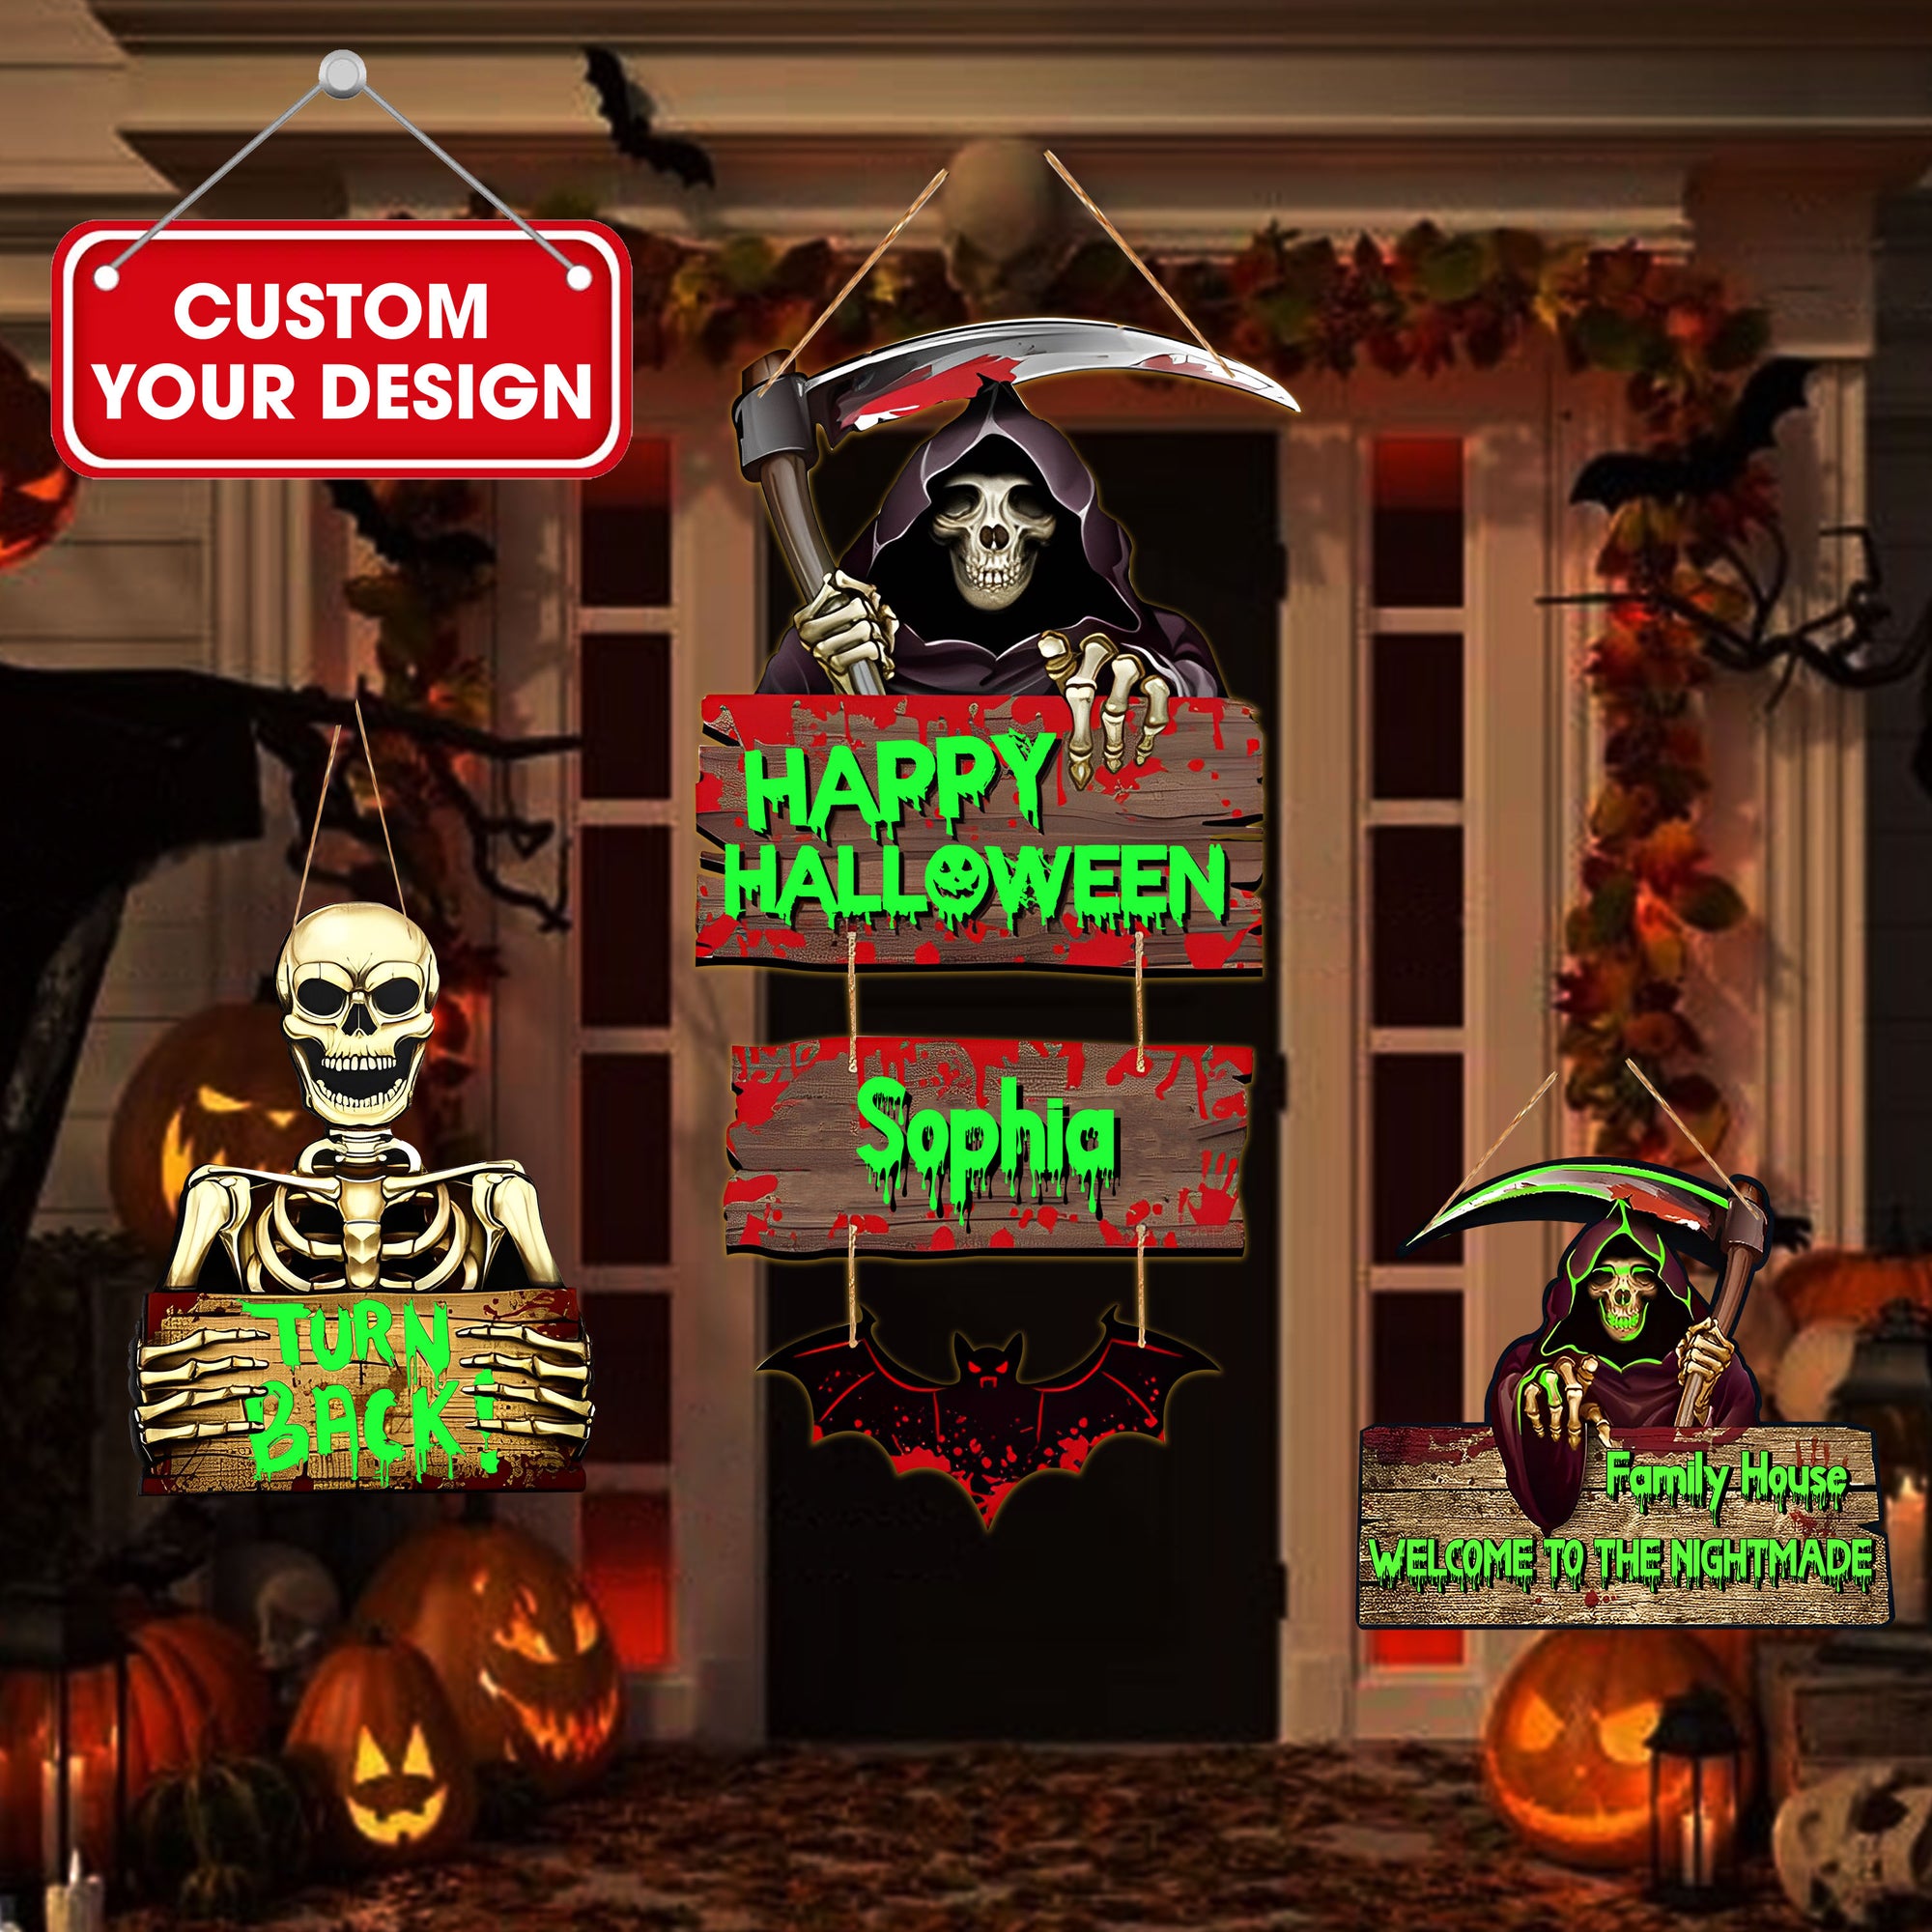 Glow-in-the-Dark 'Beware' Halloween Hanging Signs - 3-Piece Set for Outdoor Decor -Personalized Halloween Light Yard & Lawn Sign